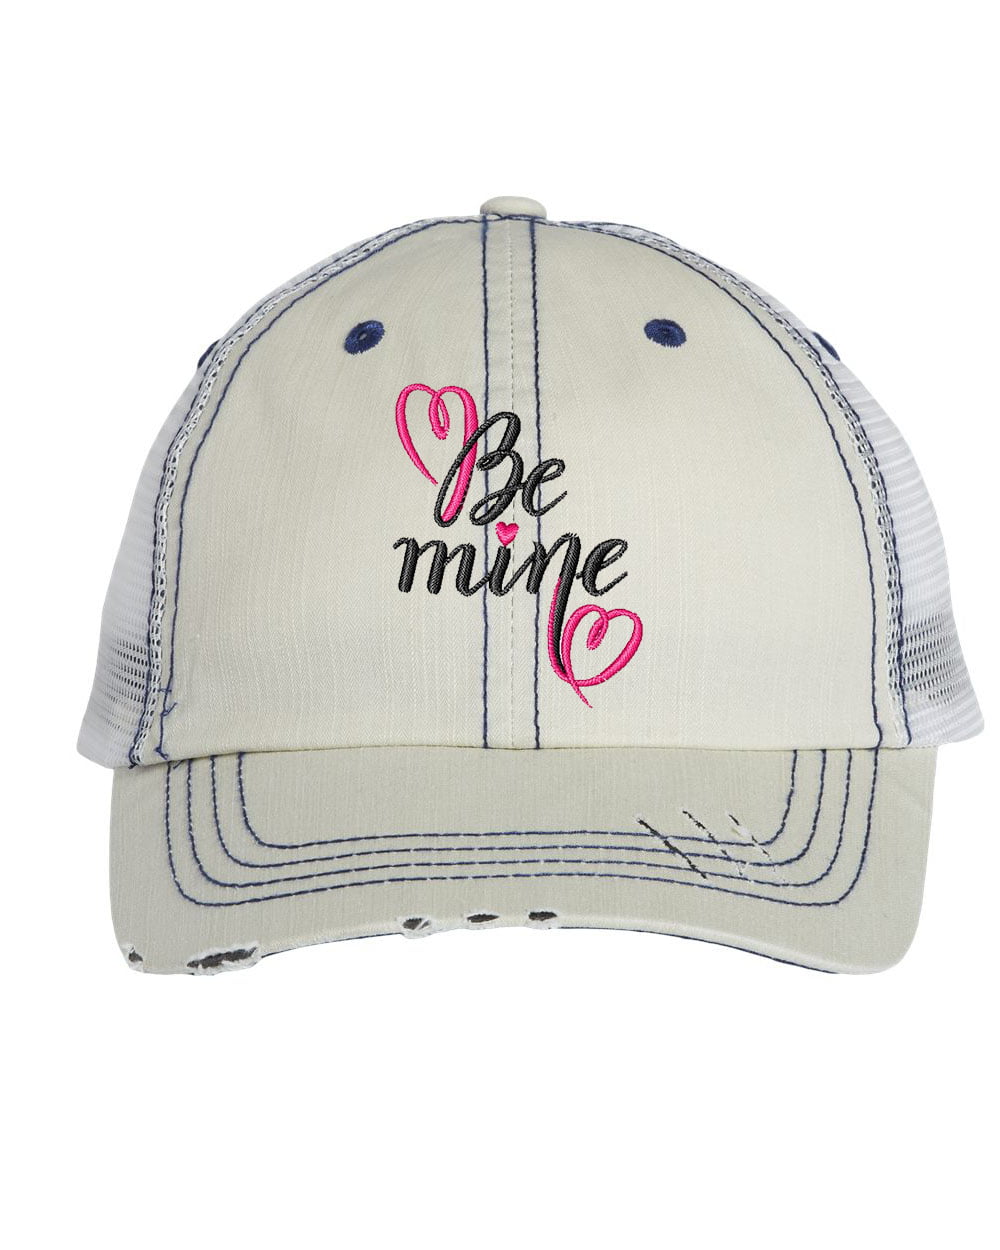 Go All Out Adult Hubby Embroidered Distressed Trucker Cap 